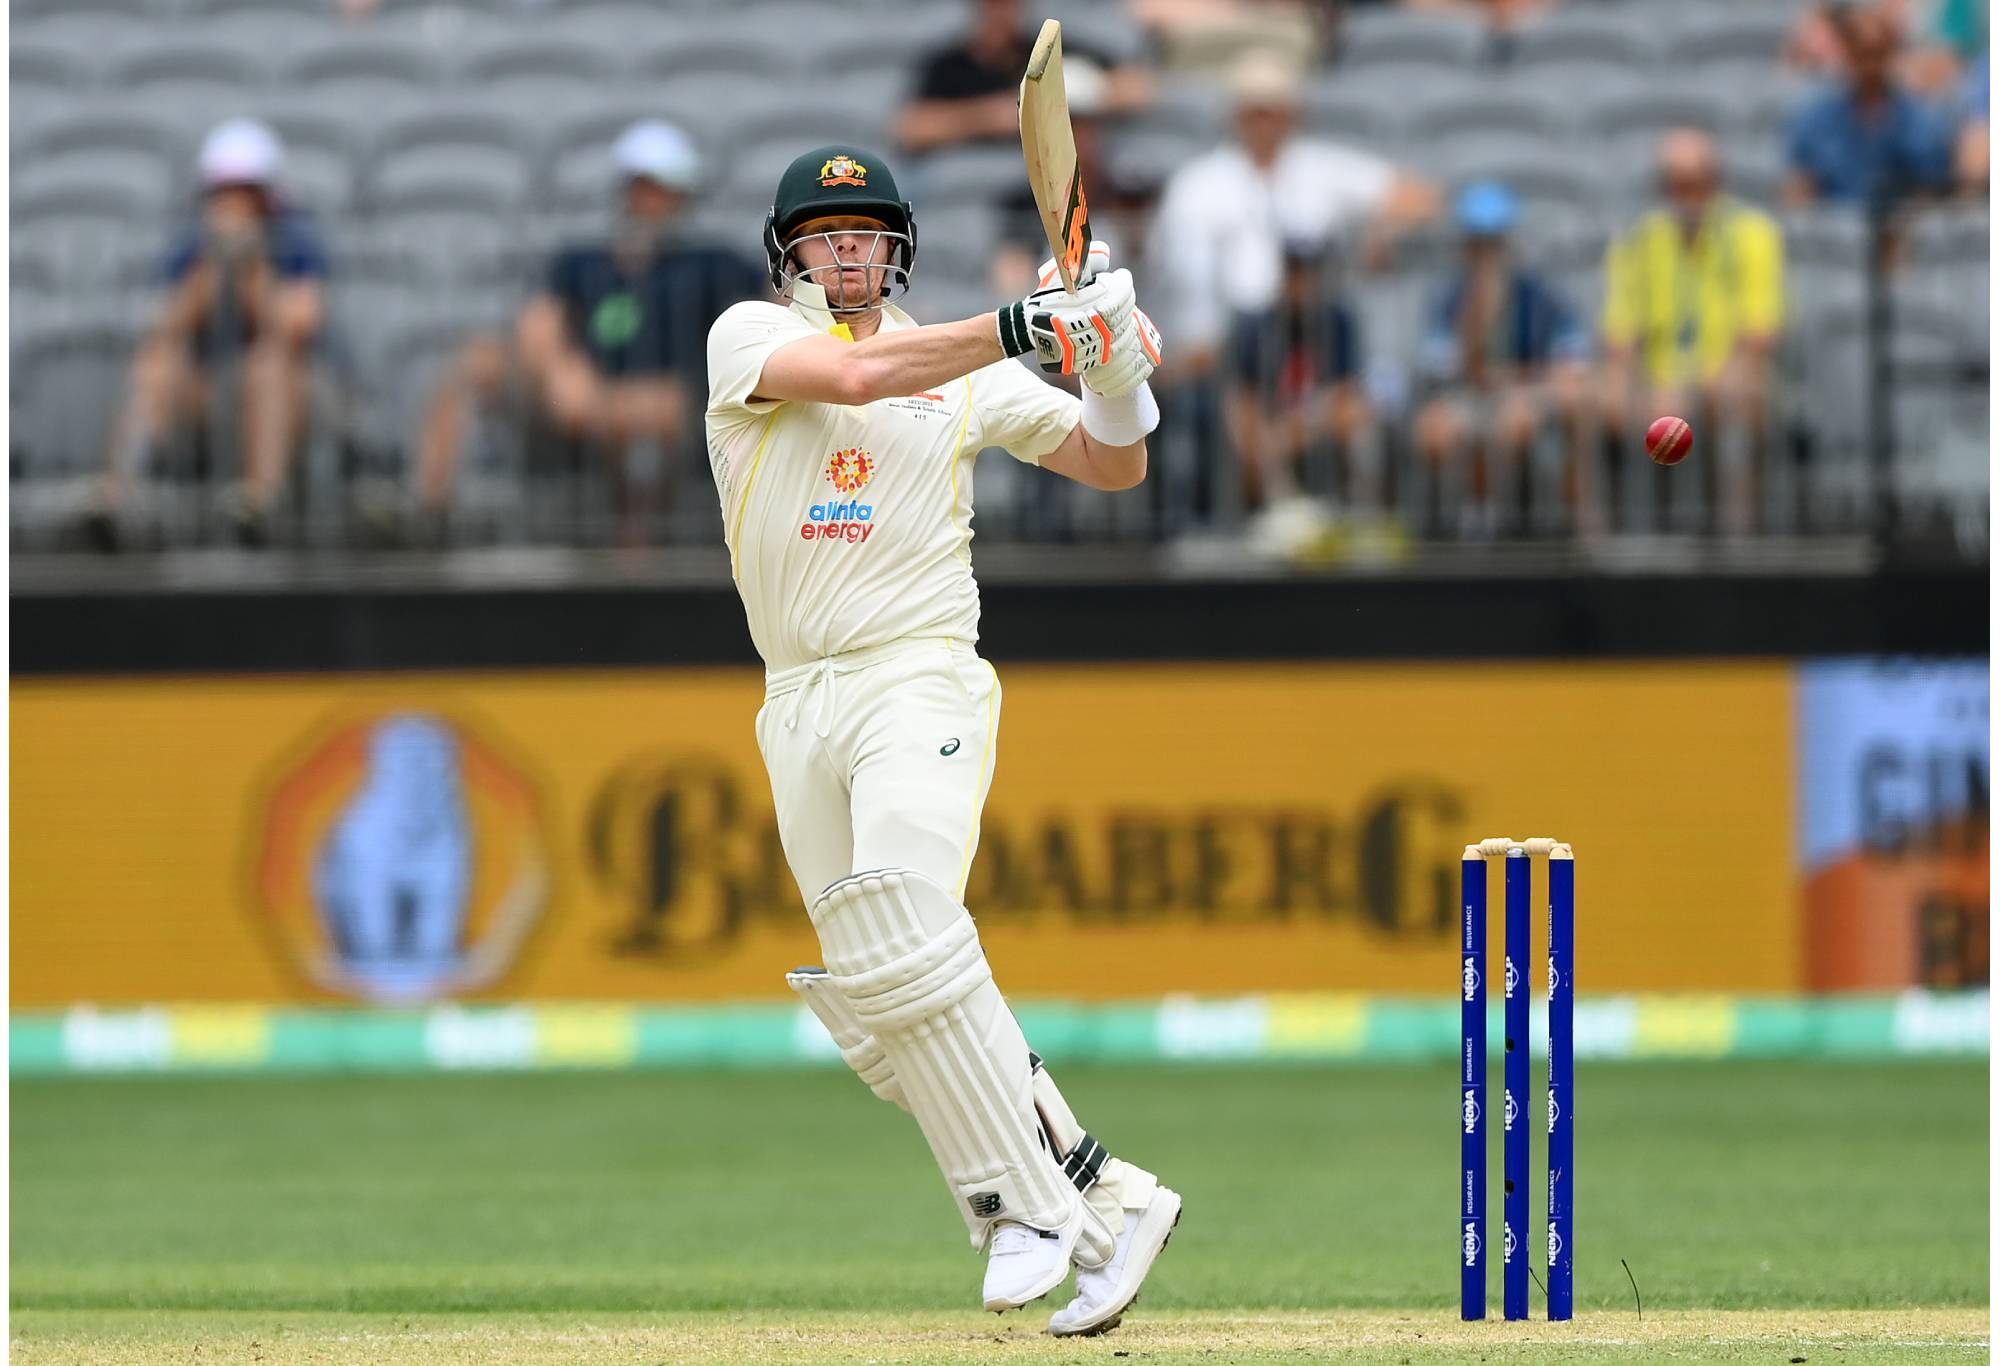 PERTH, AUSTRALIA - DECEMBER 01: Steve Smith of Australia bats during day two of the First Test match between Australia and the West Indies at Optus Stadium on December 01, 2022 in Perth, Australia. (Photo by Quinn Rooney - CA/Cricket Australia via Getty Images)